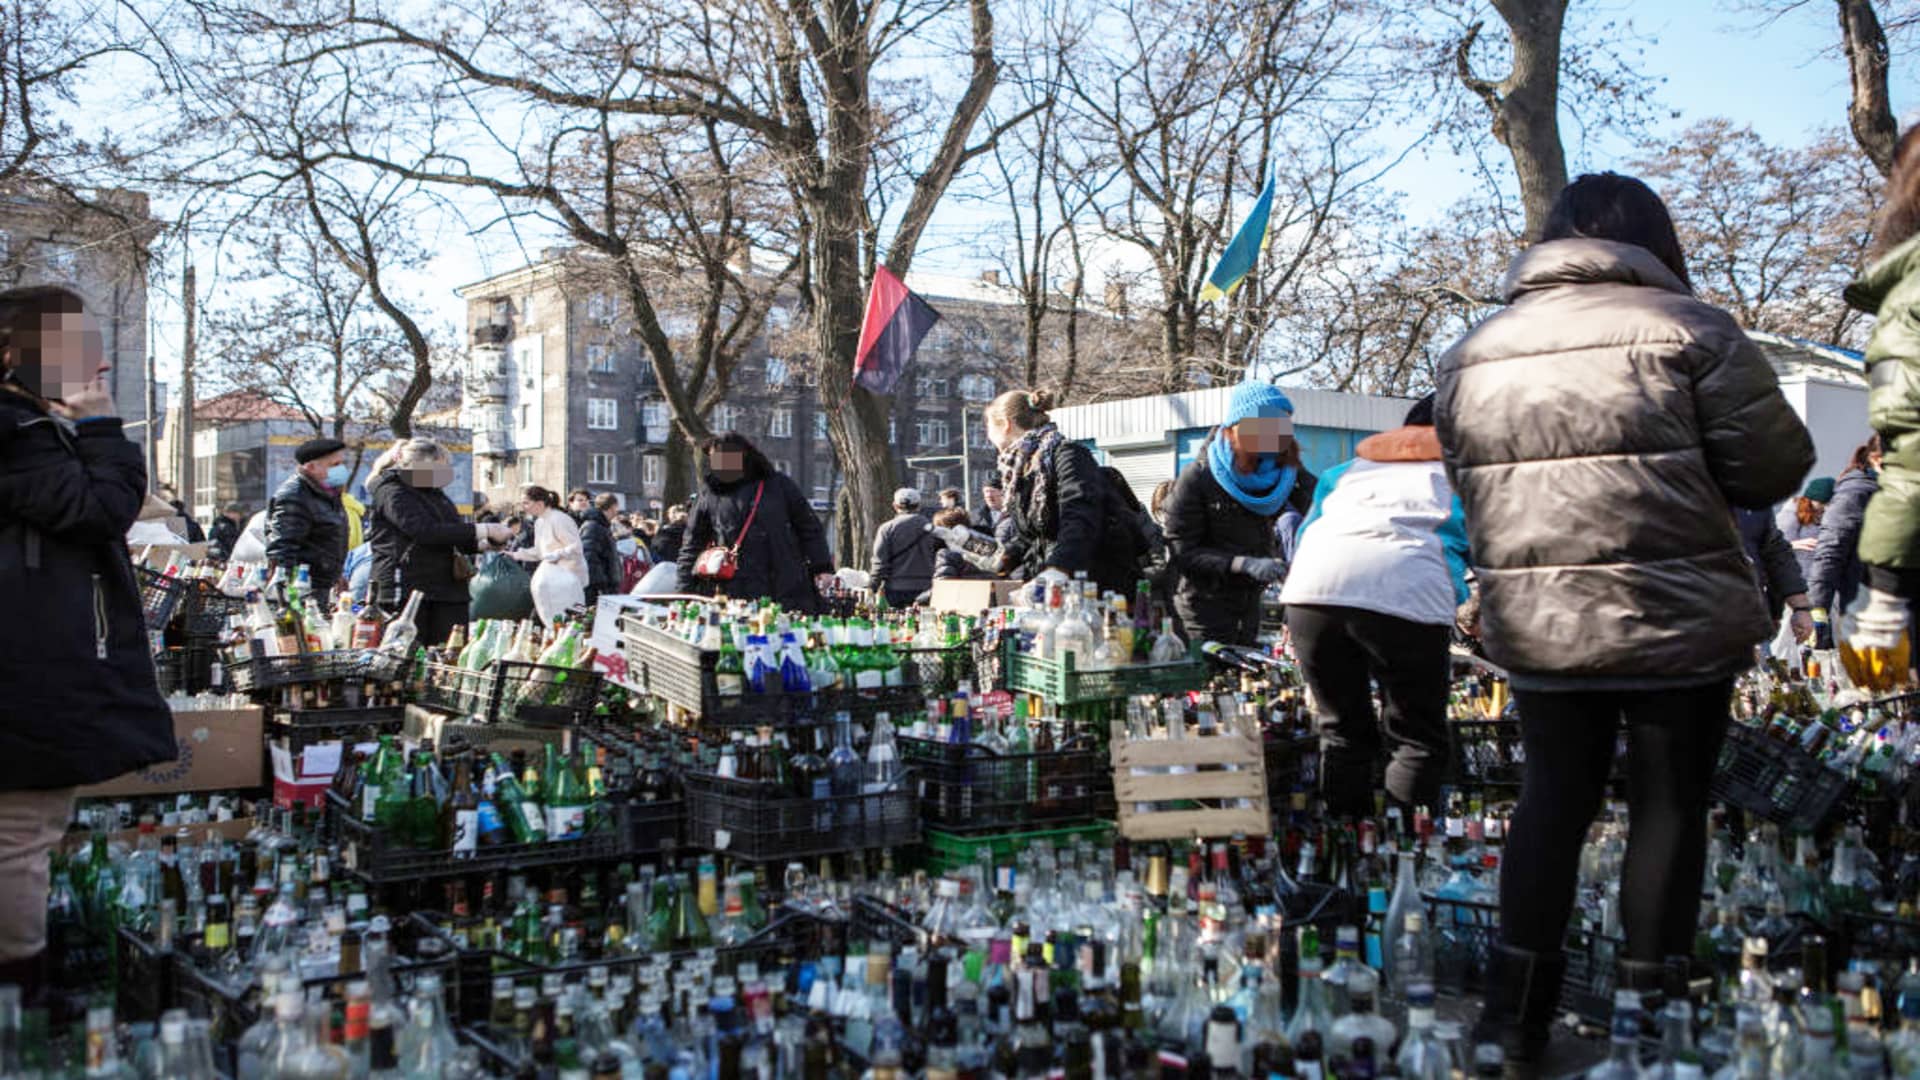 Dnipro locals gather at Rocket Park to prepare molotov cocktails on the 4th day since start of large-scale Russian attacks in the country, in Dnipro, Ukraine, on February 27, 2022